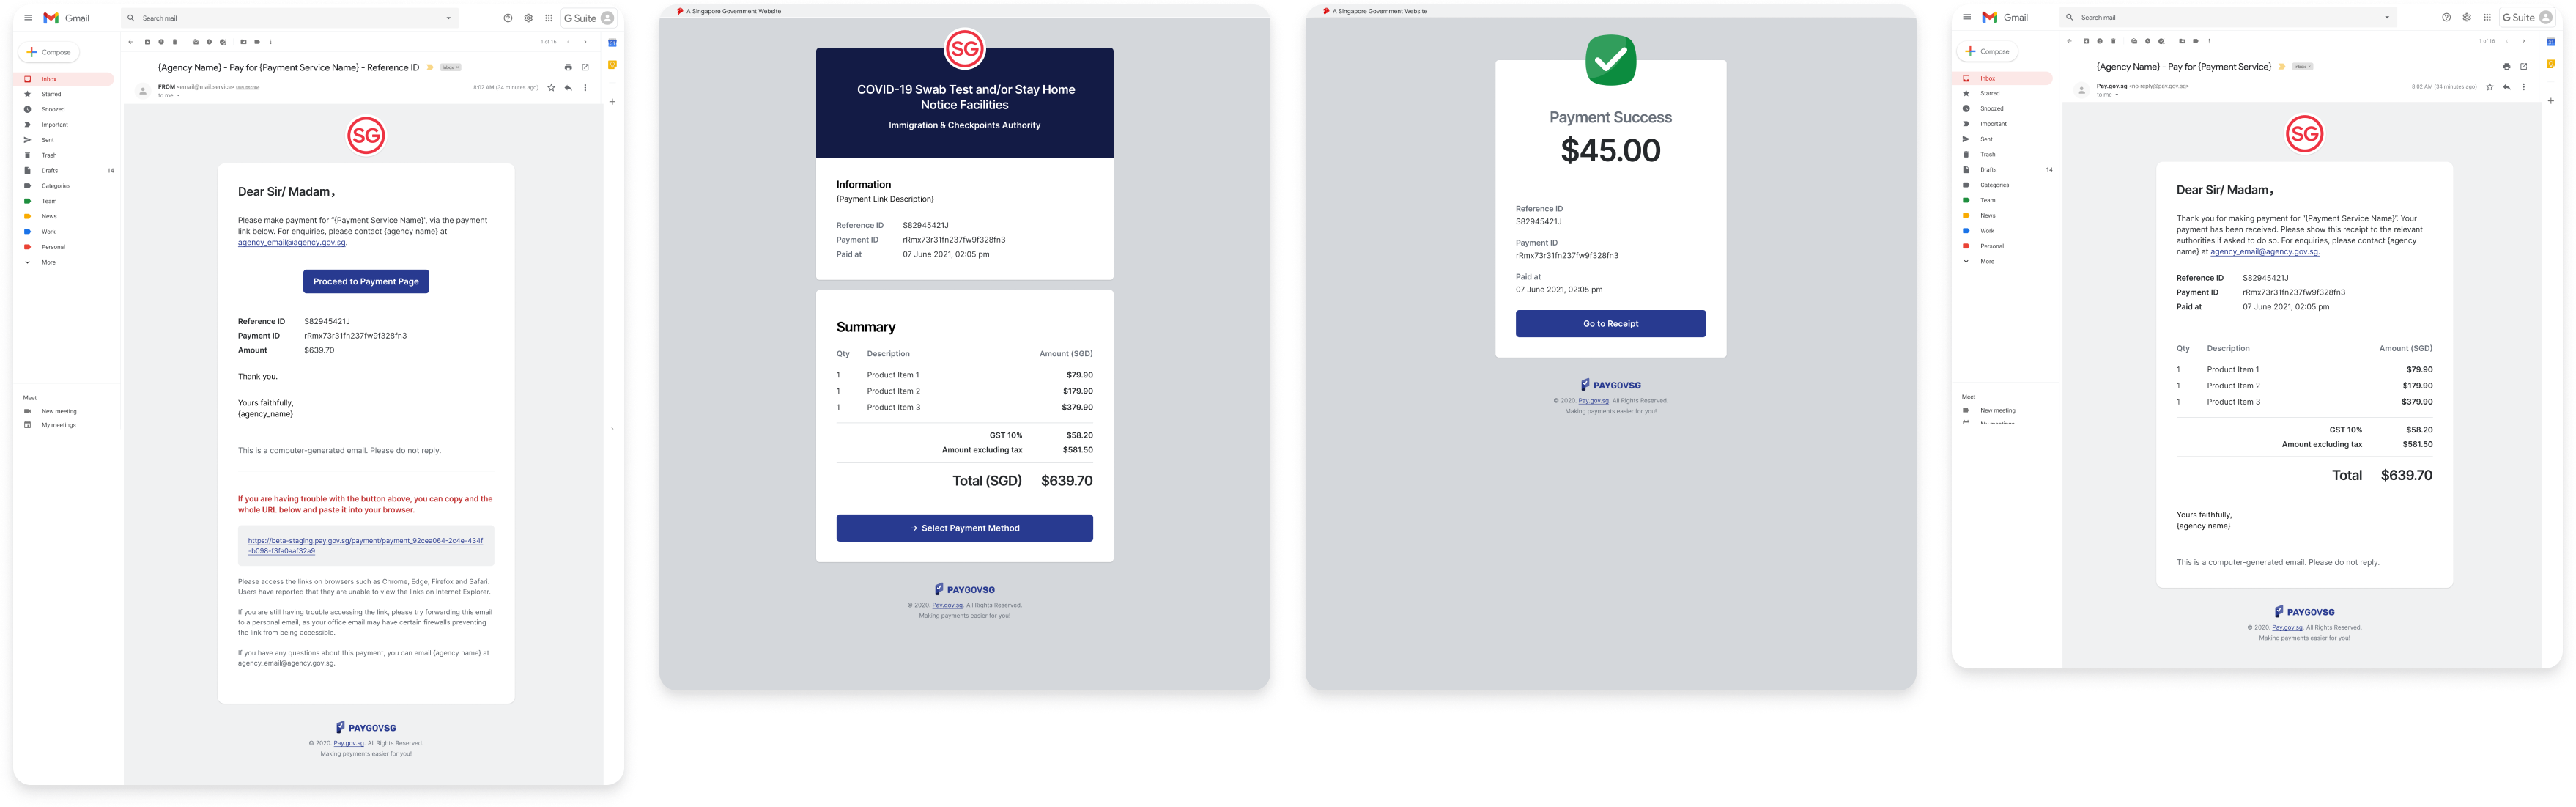 I also improved the original payment flow to align with the vision and style